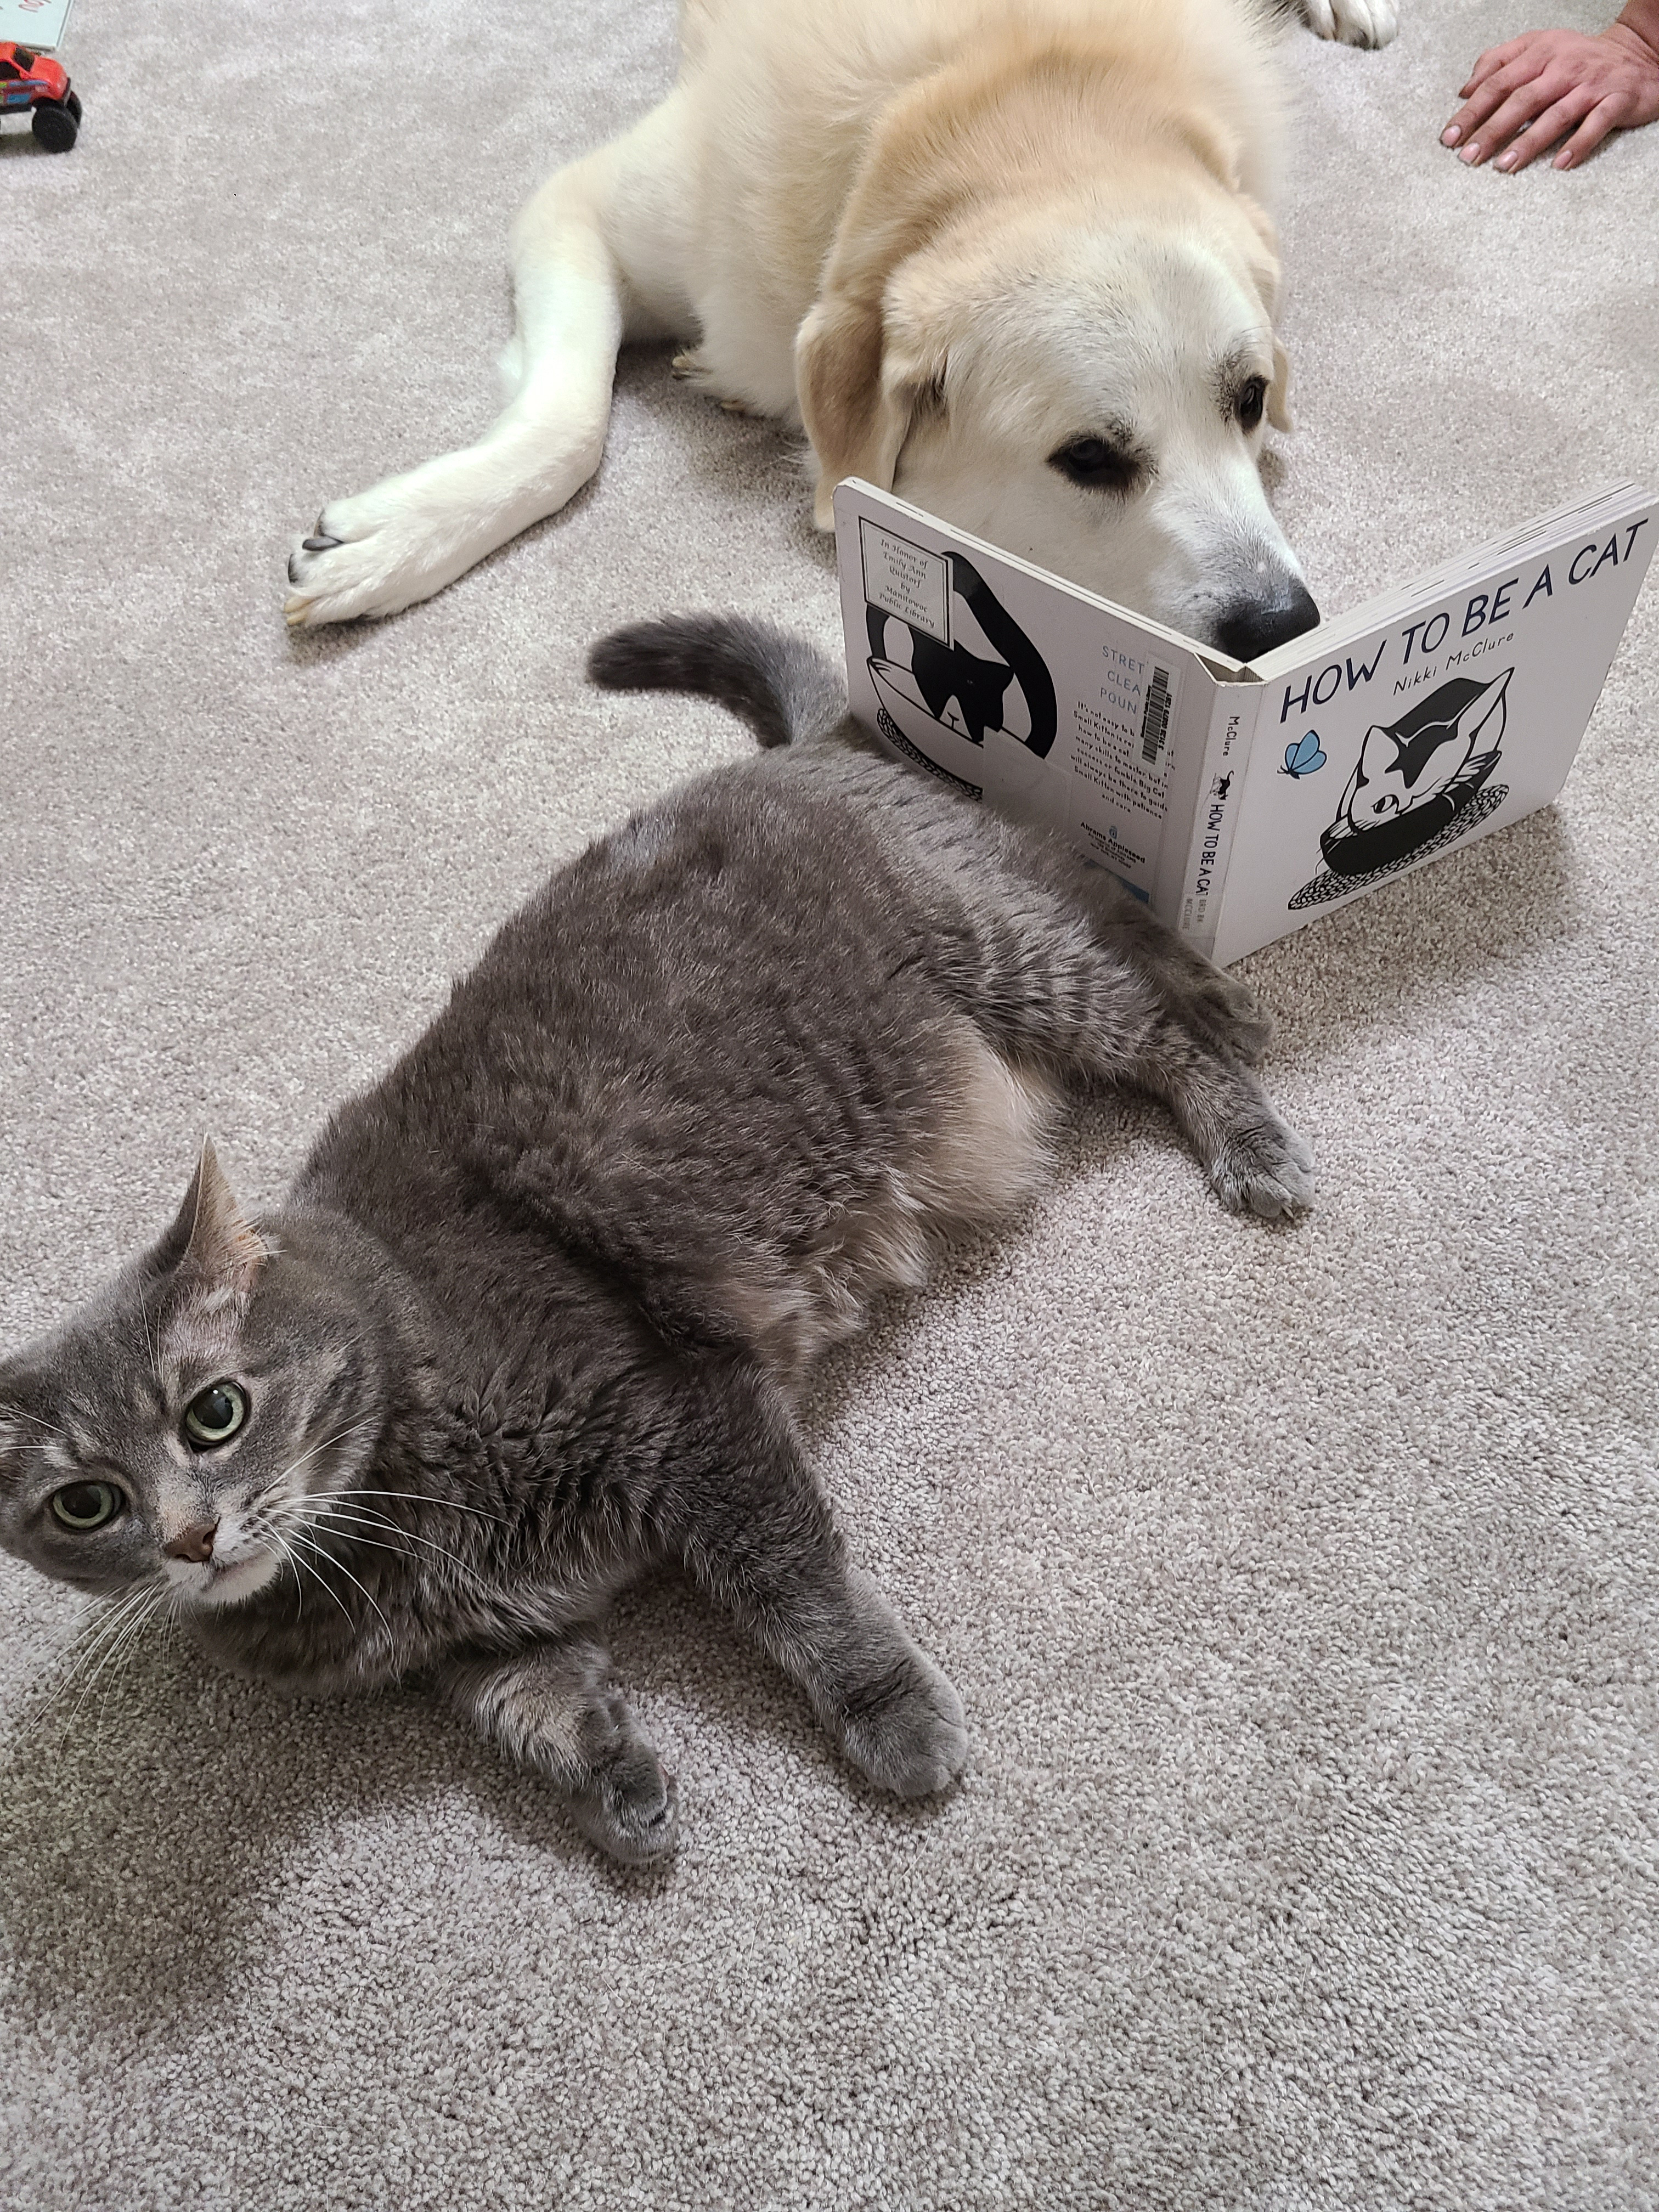 Dog reading "How to be a cat" with actual cat